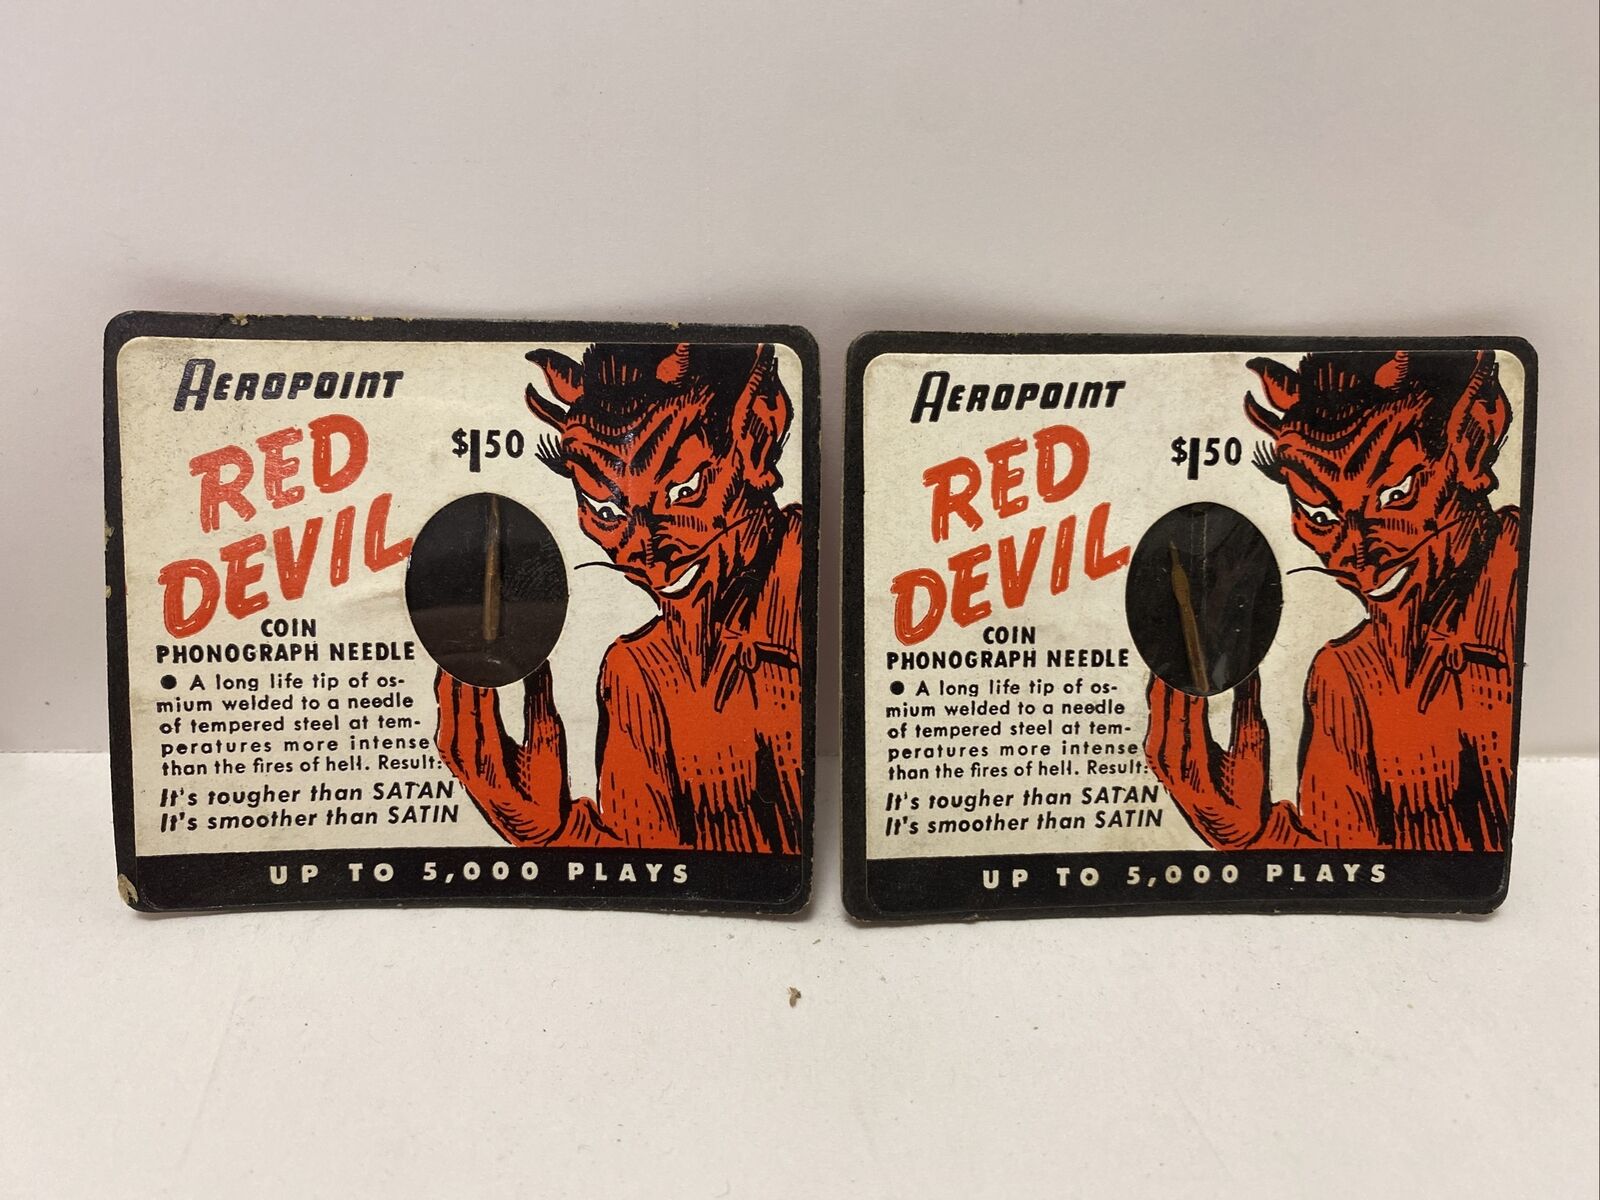 Aeropoint Red Devil Coin Phonograph Needle - Lot Of 2 New 